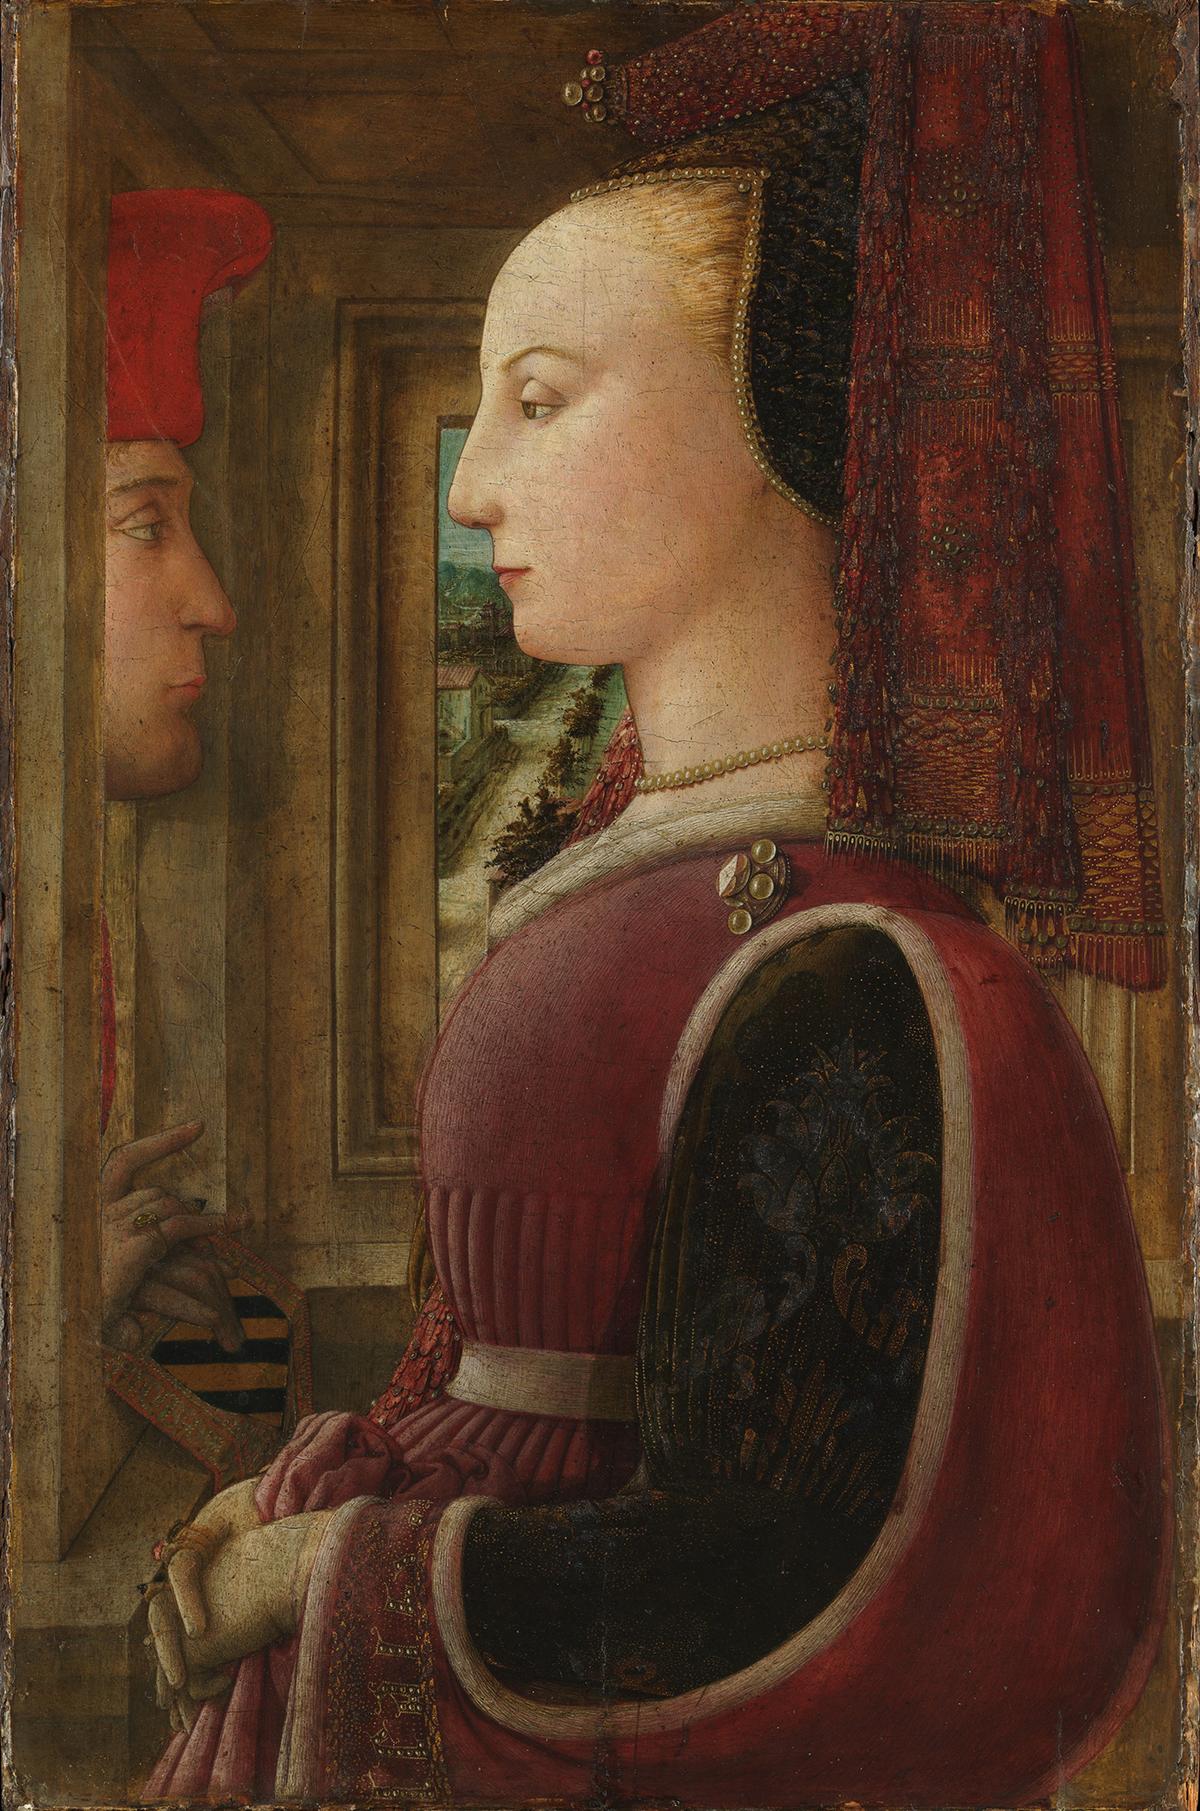 "Portrait of a Woman With a Man at a Casement," circa 1440, by Fra Filippo Lippi. Tempera on wood; 25 1/4 inches by 16 1/2 inches. The Metropolitan Museum of Art, New York City. (Public Domain)